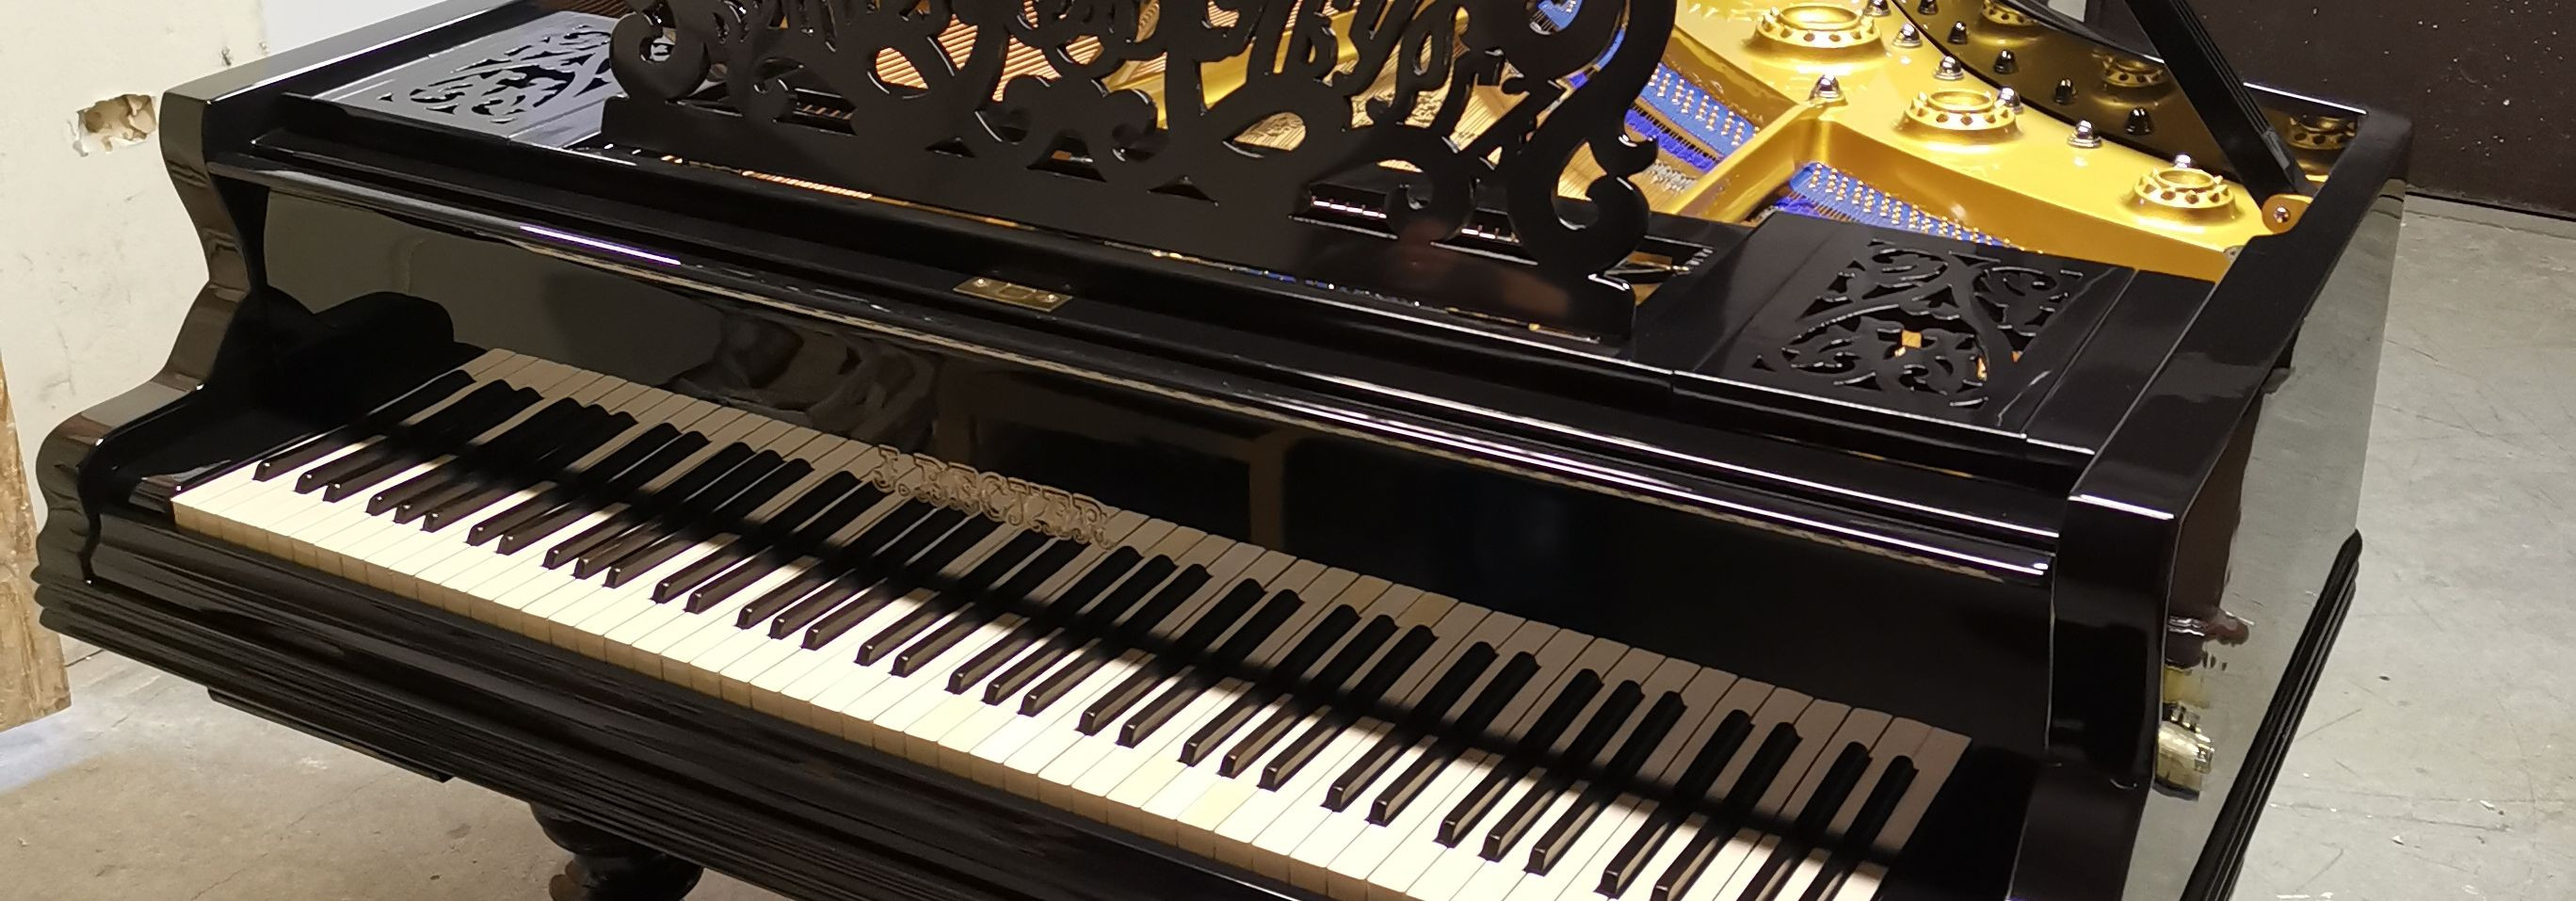 At PIANOFIX OÜ, we believe that every piano has a story to tell, a melody to share, and a legacy to continue. Our mission is simple yet profound: 'We specialize